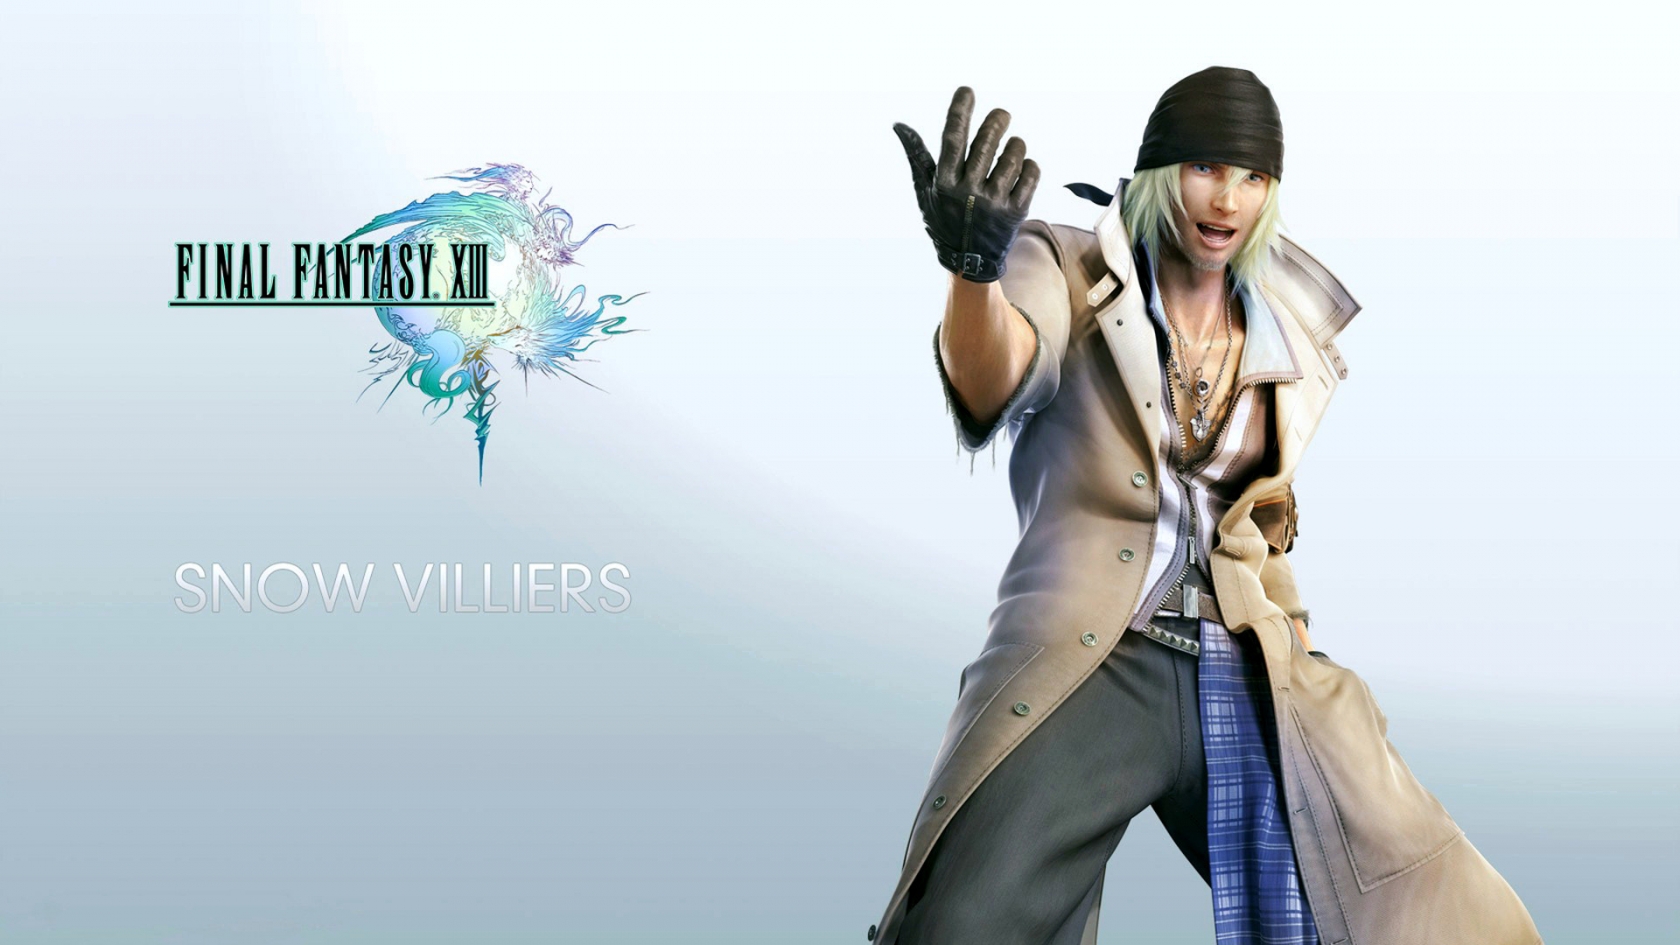 Final Fantasy XIII Snow Villiers for 1680 x 945 HDTV resolution